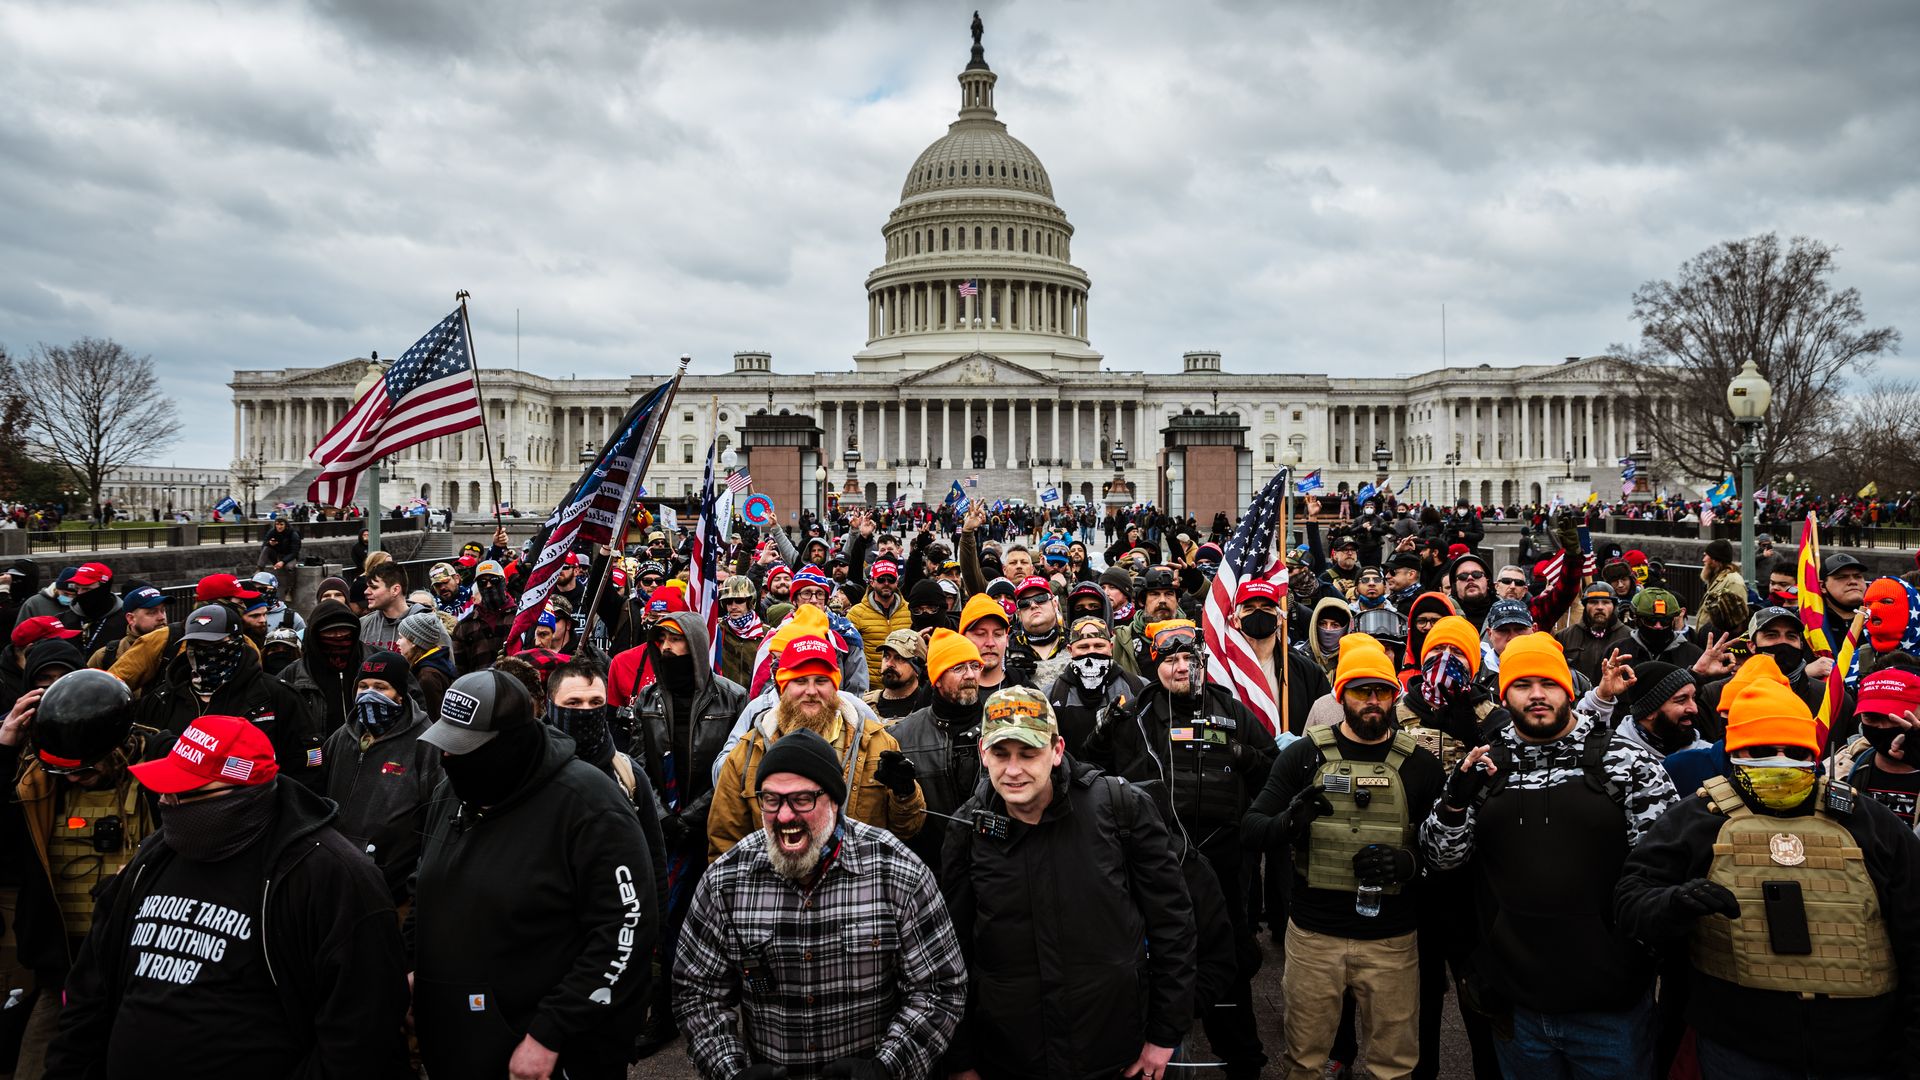 Pro-Trump protesters gather in front of the U.S. Capitol Building on January 6, 2021